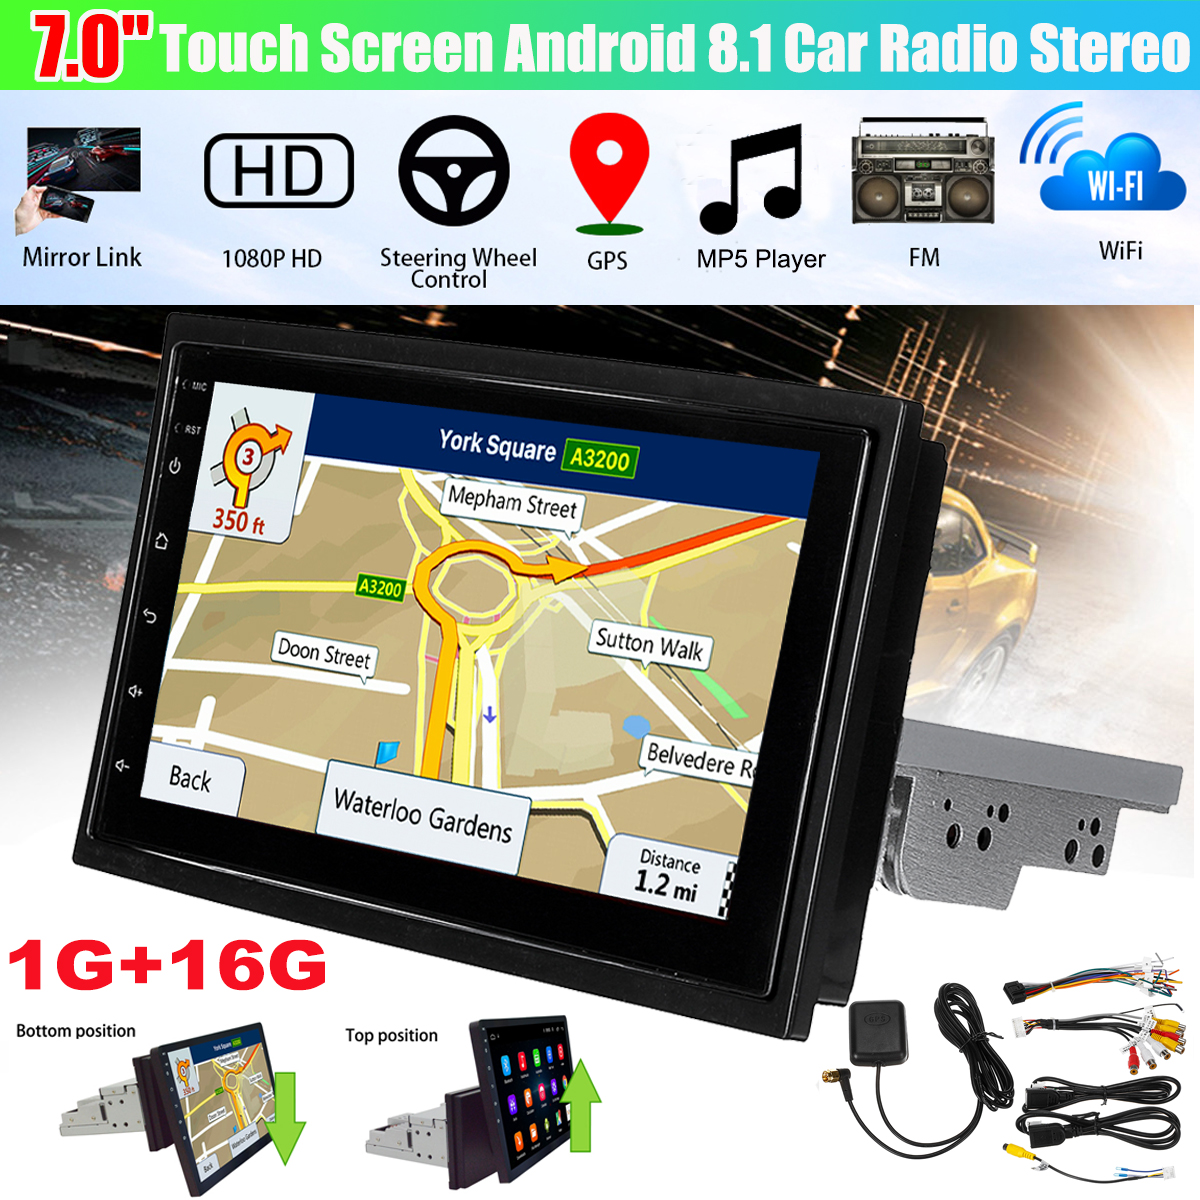 Rearview Camera+Car DVR 7" Android 8.1 Car Stereo MP5 Player GPS WIFI FM Radio 